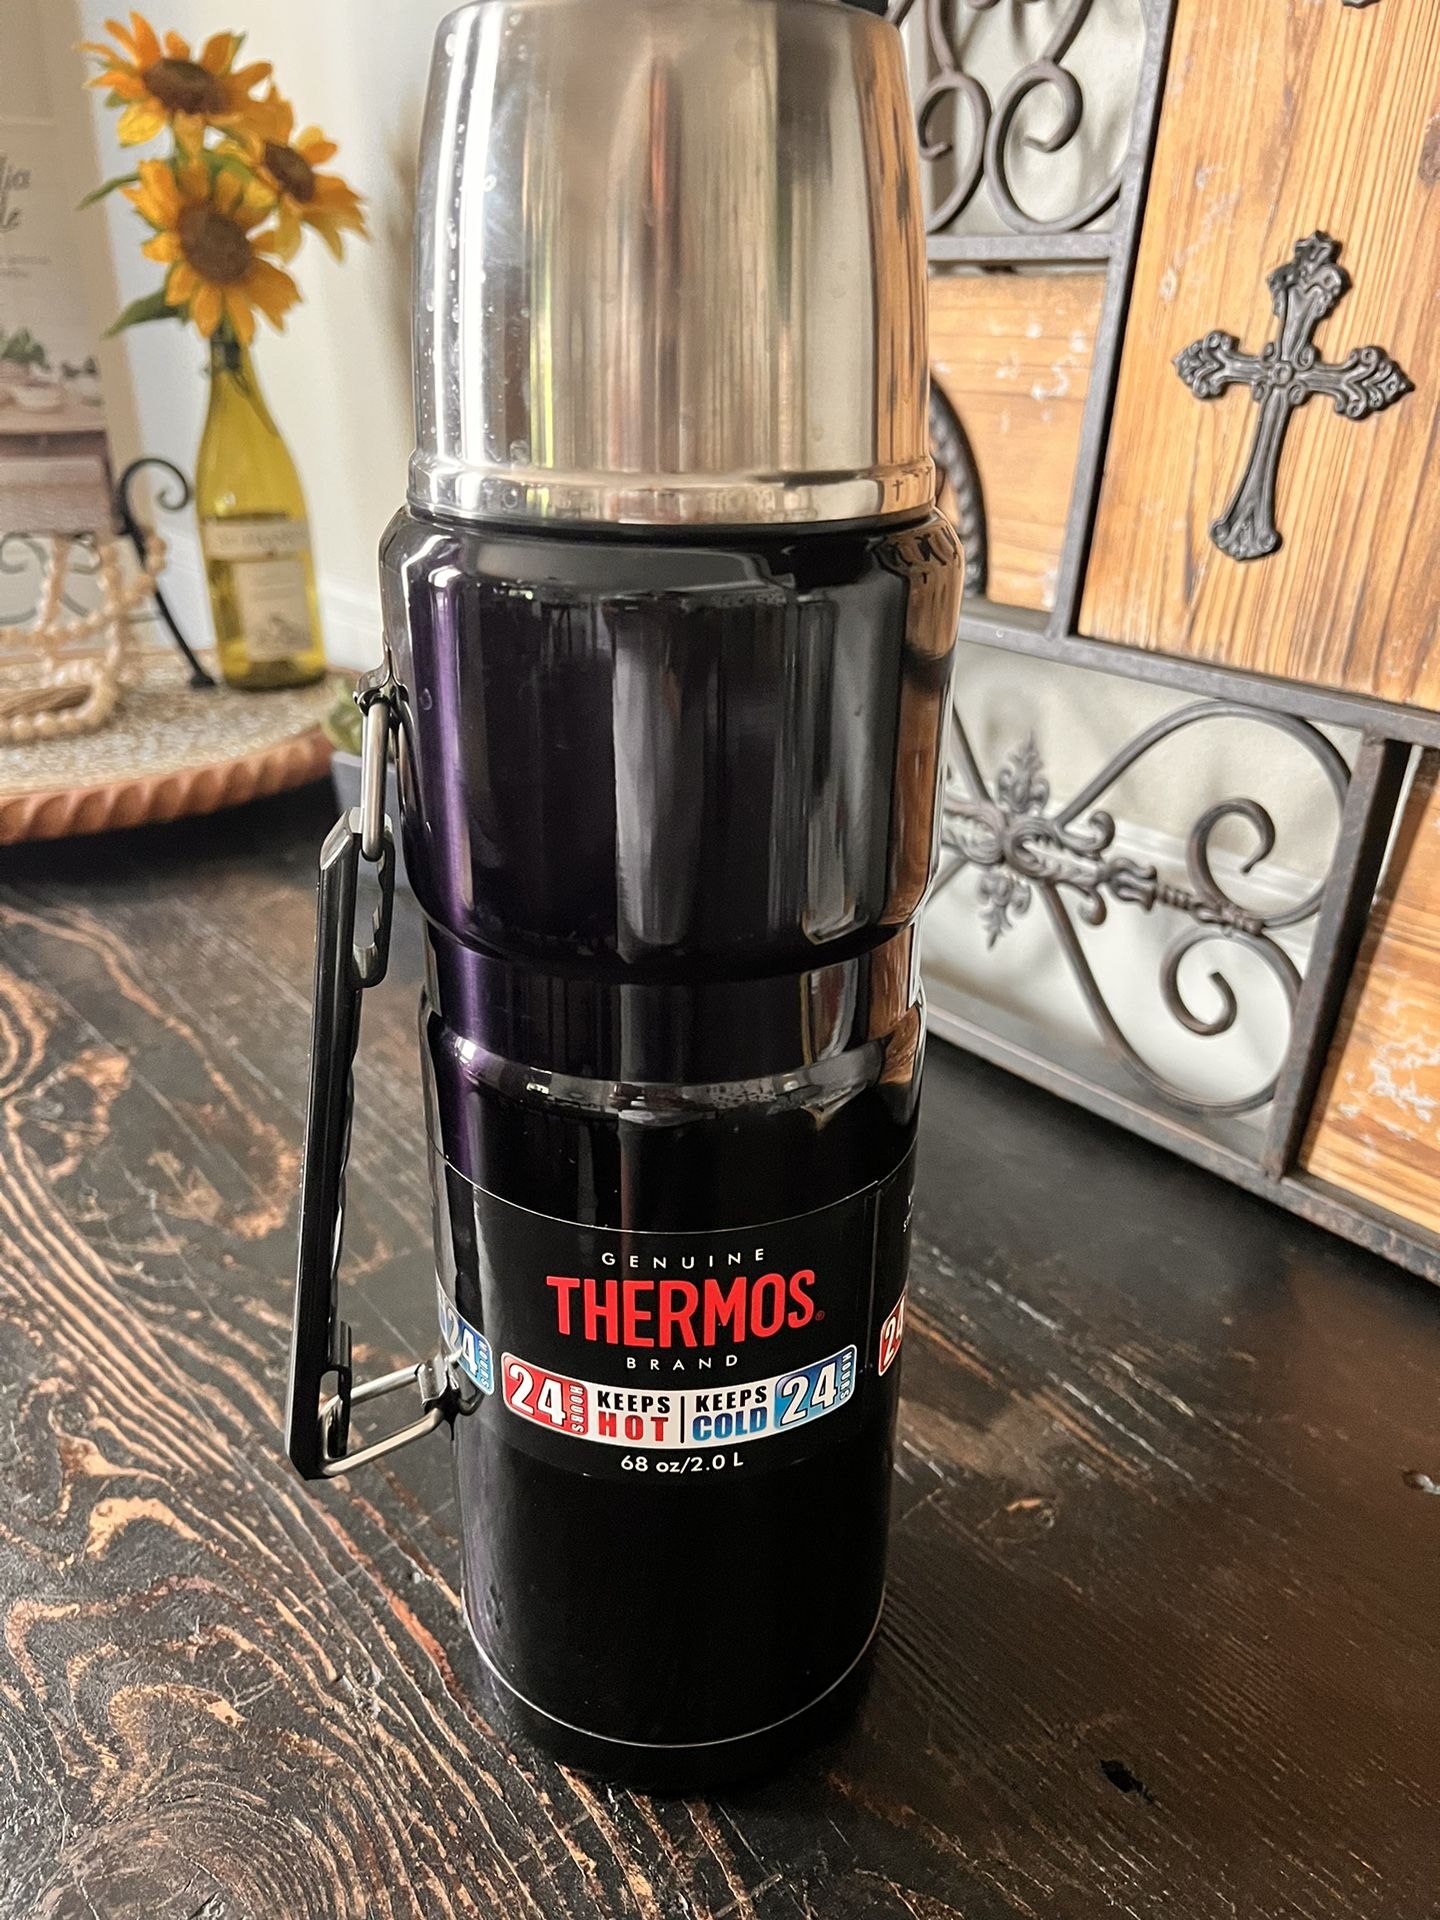 Thermos Brand 68 Oz for Sale in Bonney Lake, WA - OfferUp